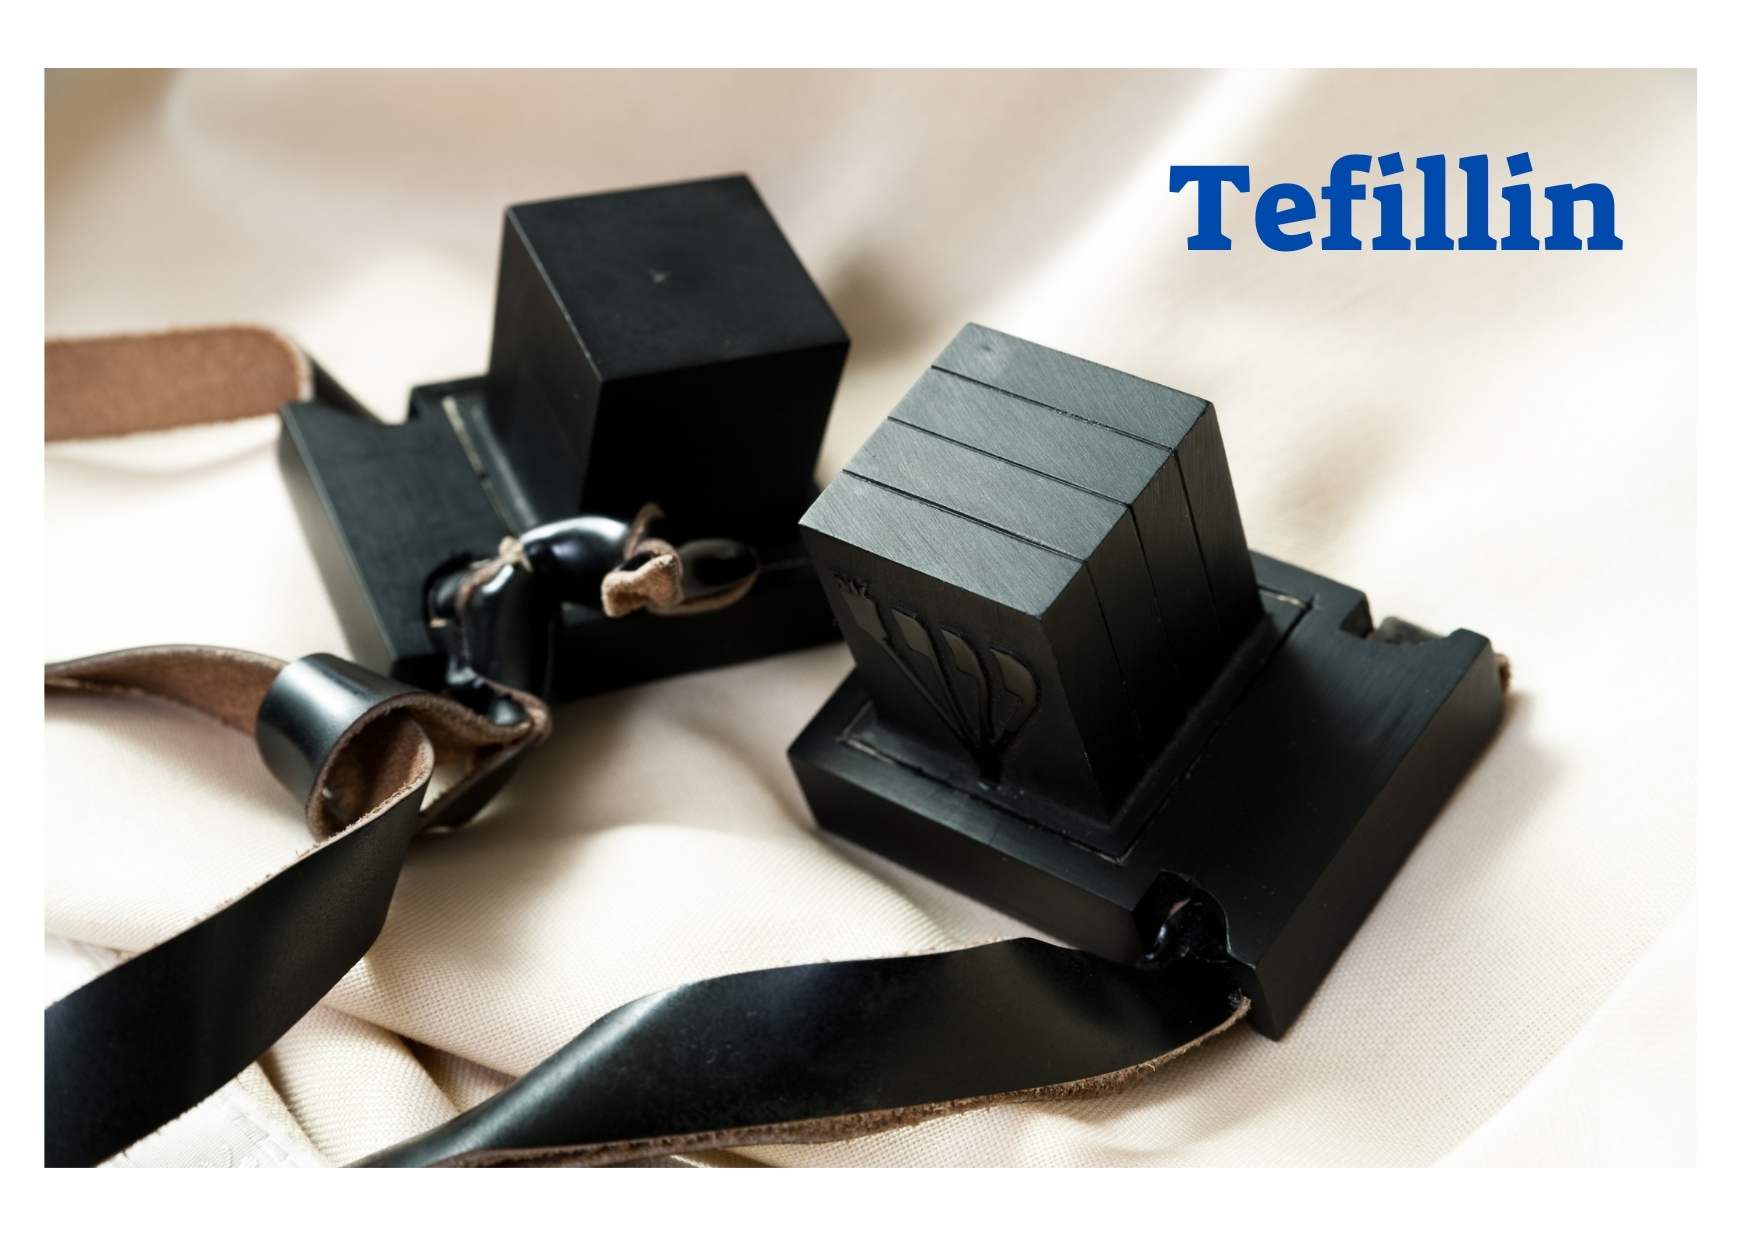 Tefillin - the Crown of Jewish Uniqueness